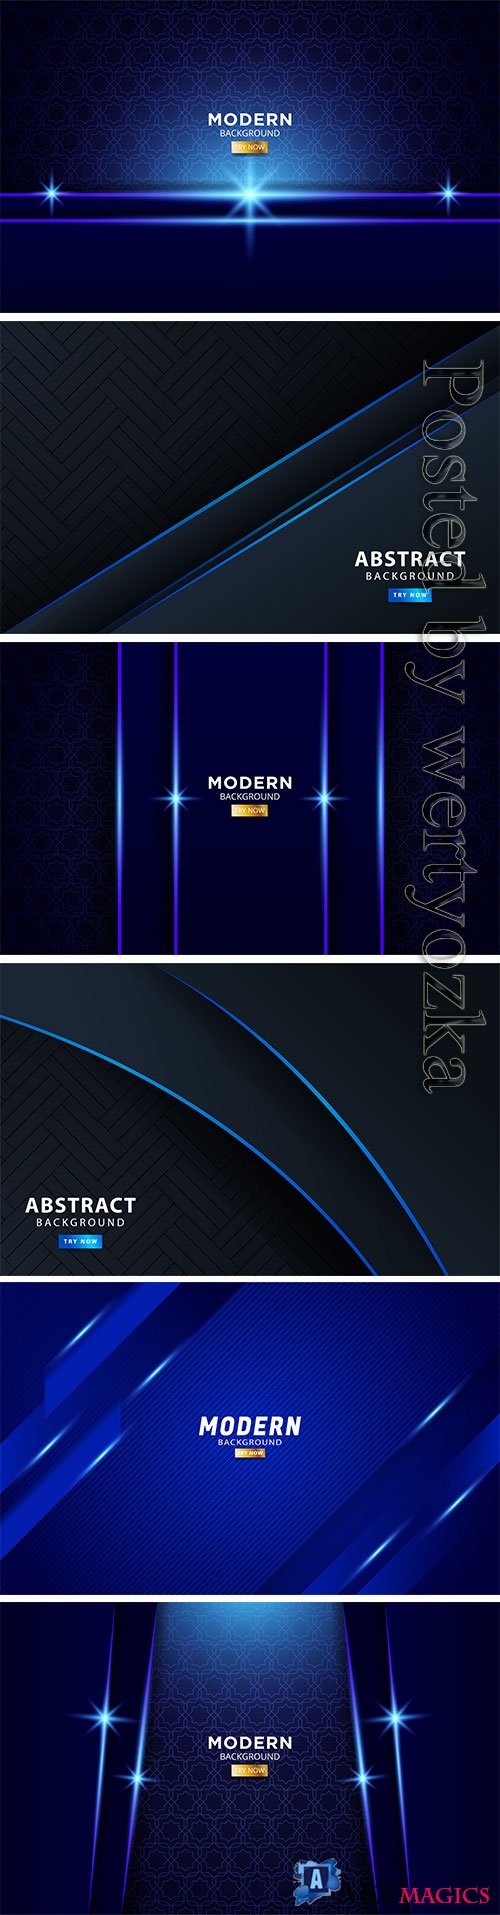 Abstract background with blue light